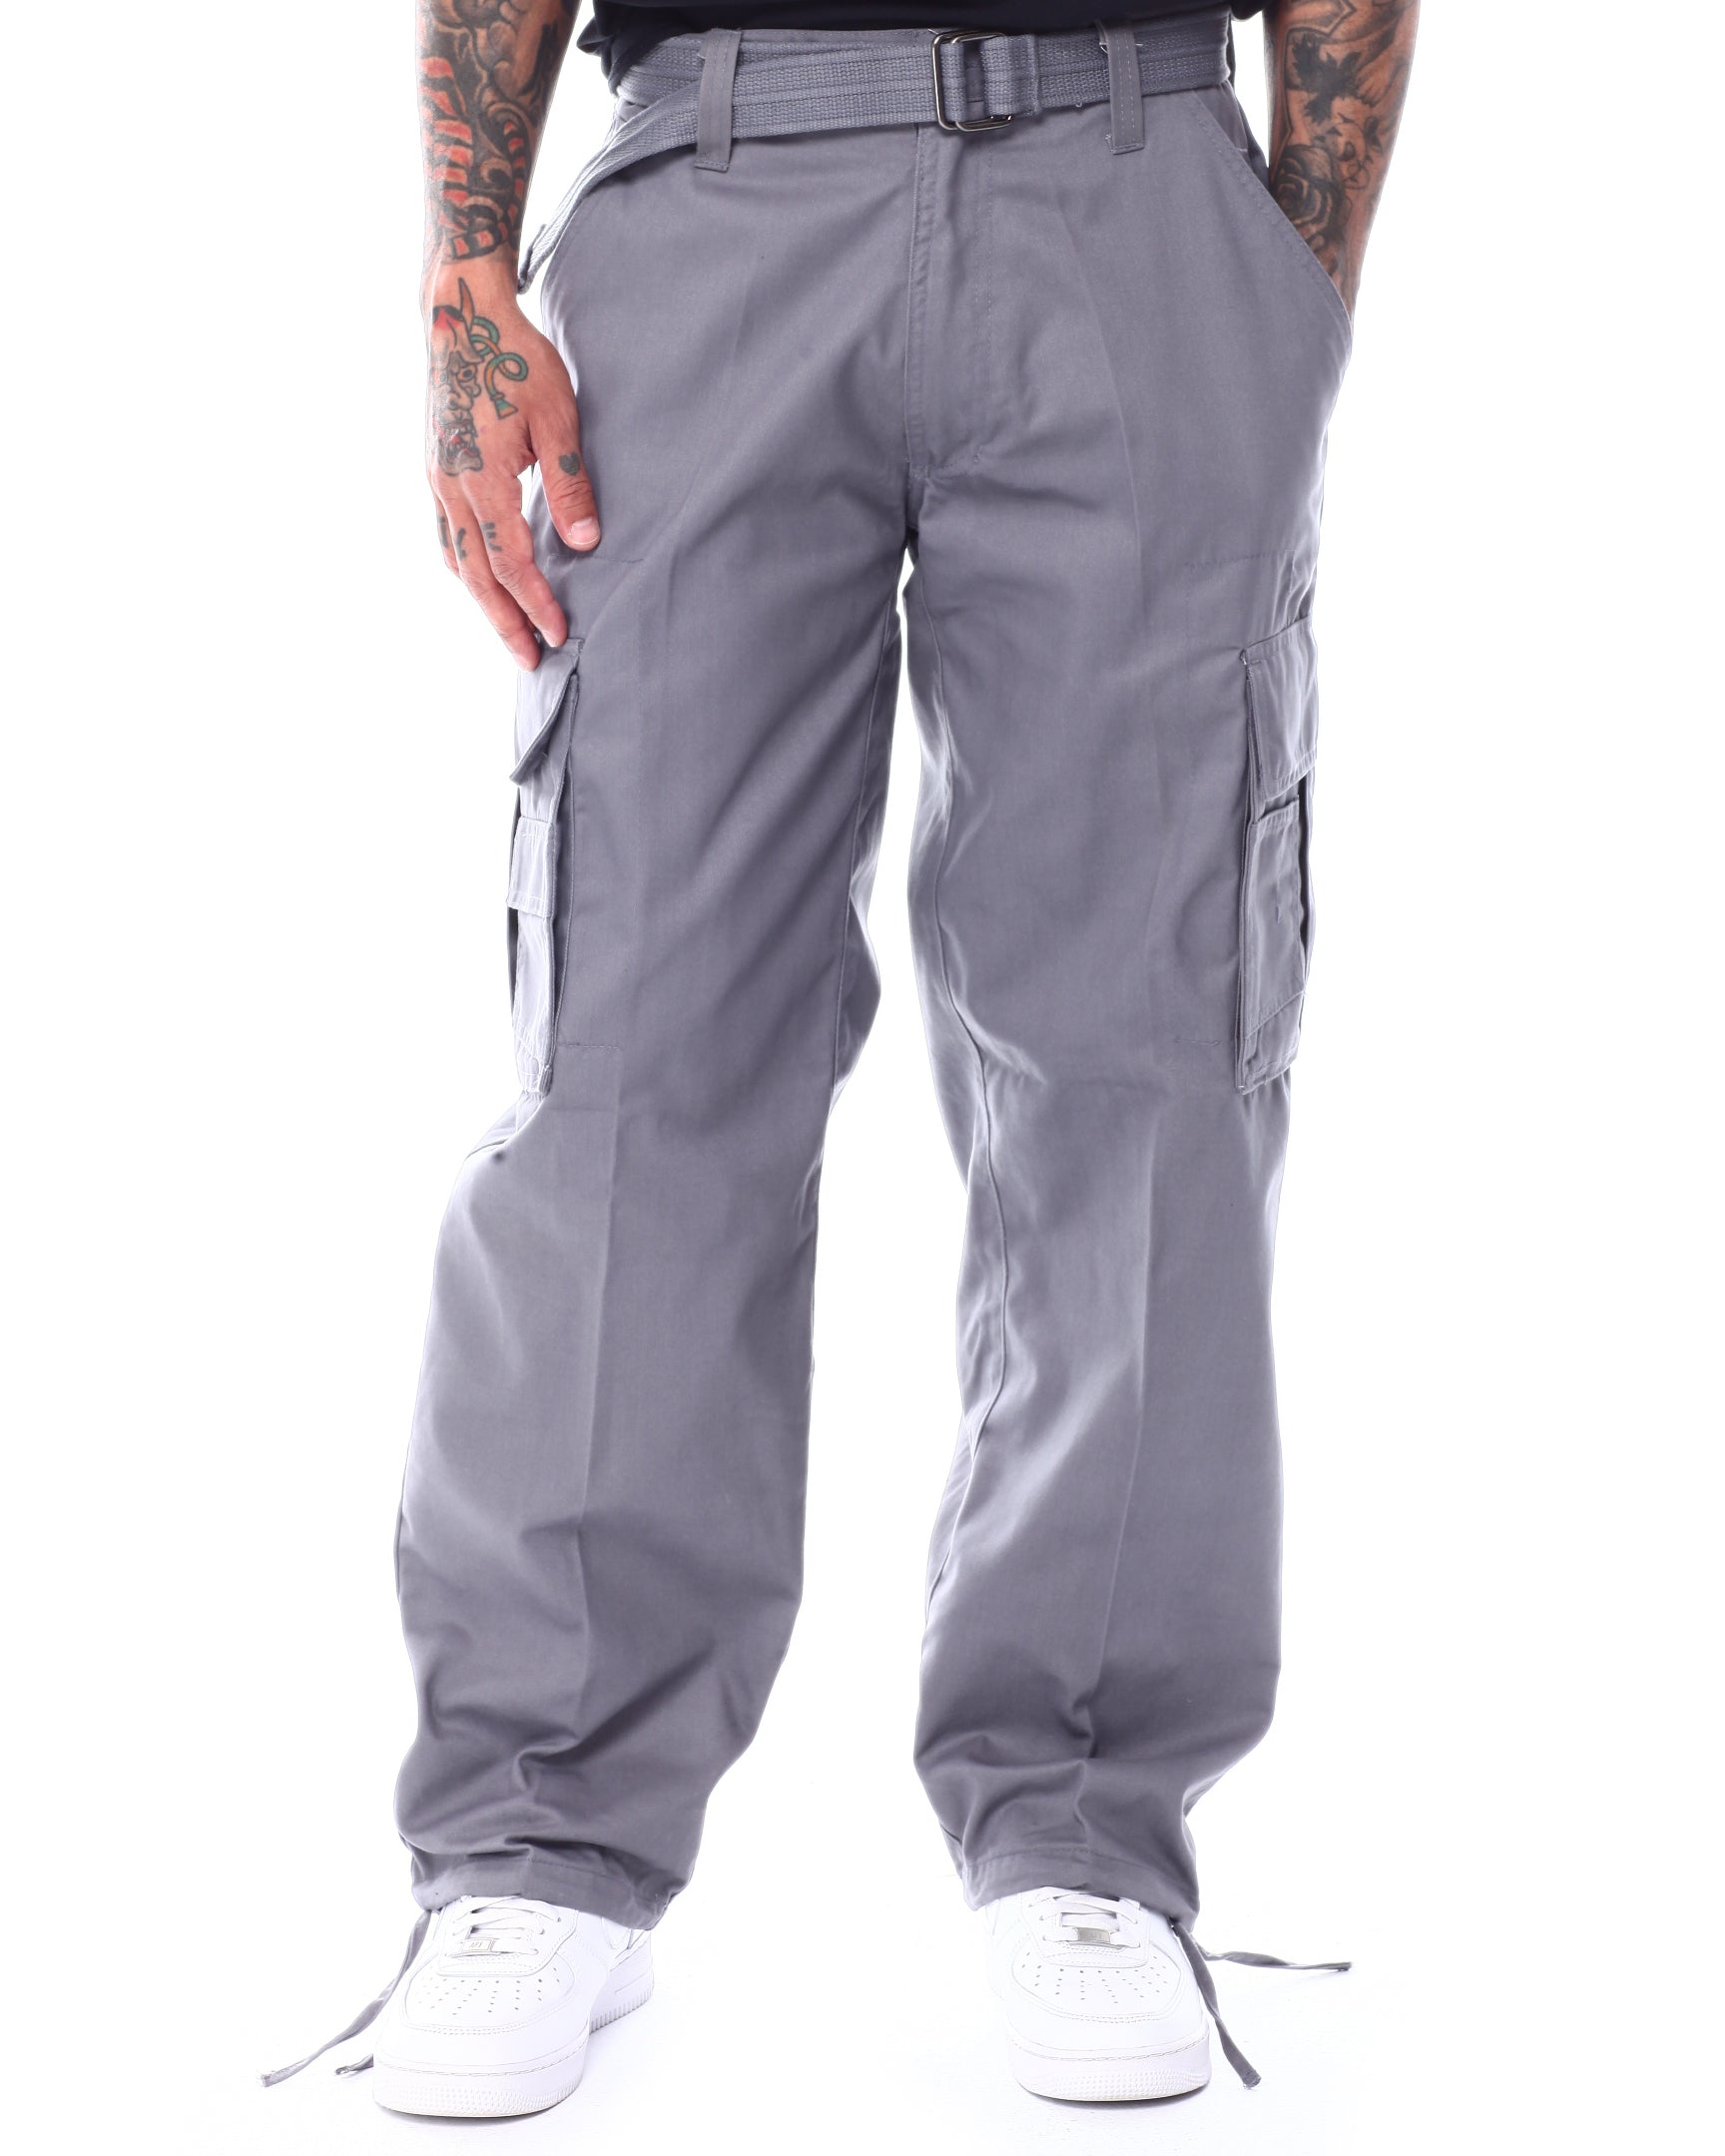 CARGO TWILL PANTS WITH BELT - GREY